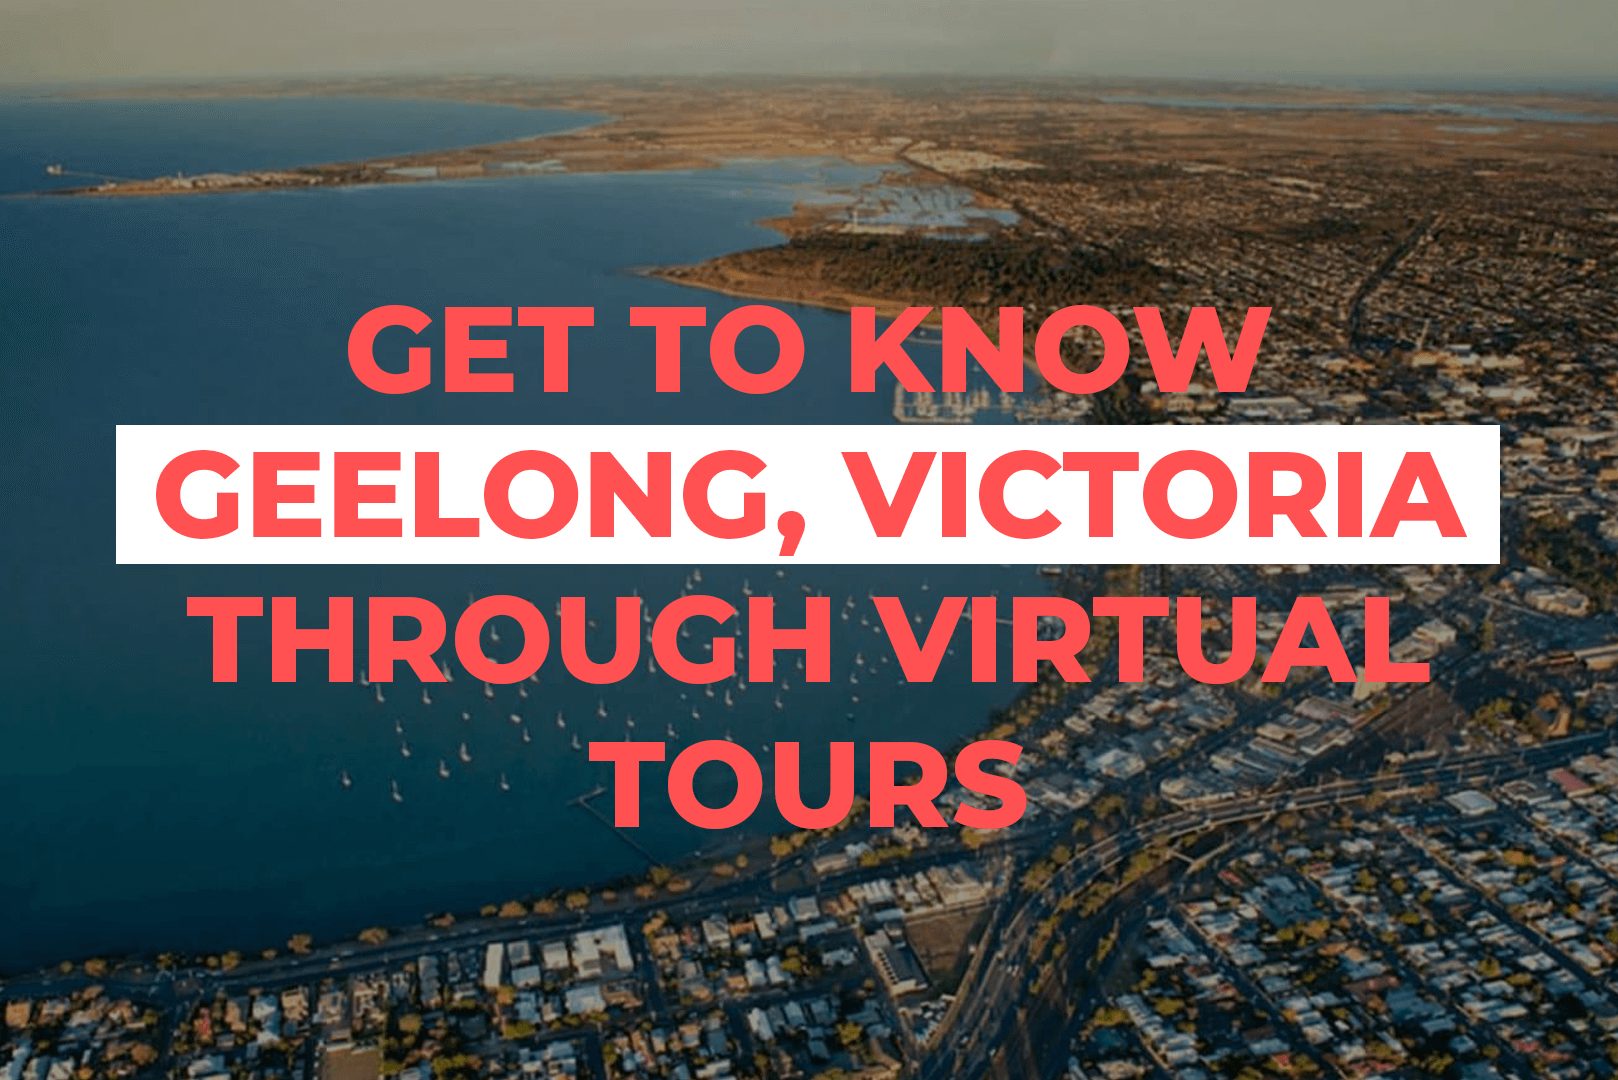 Get To Know Geelong, Victoria Through Virtual Tours